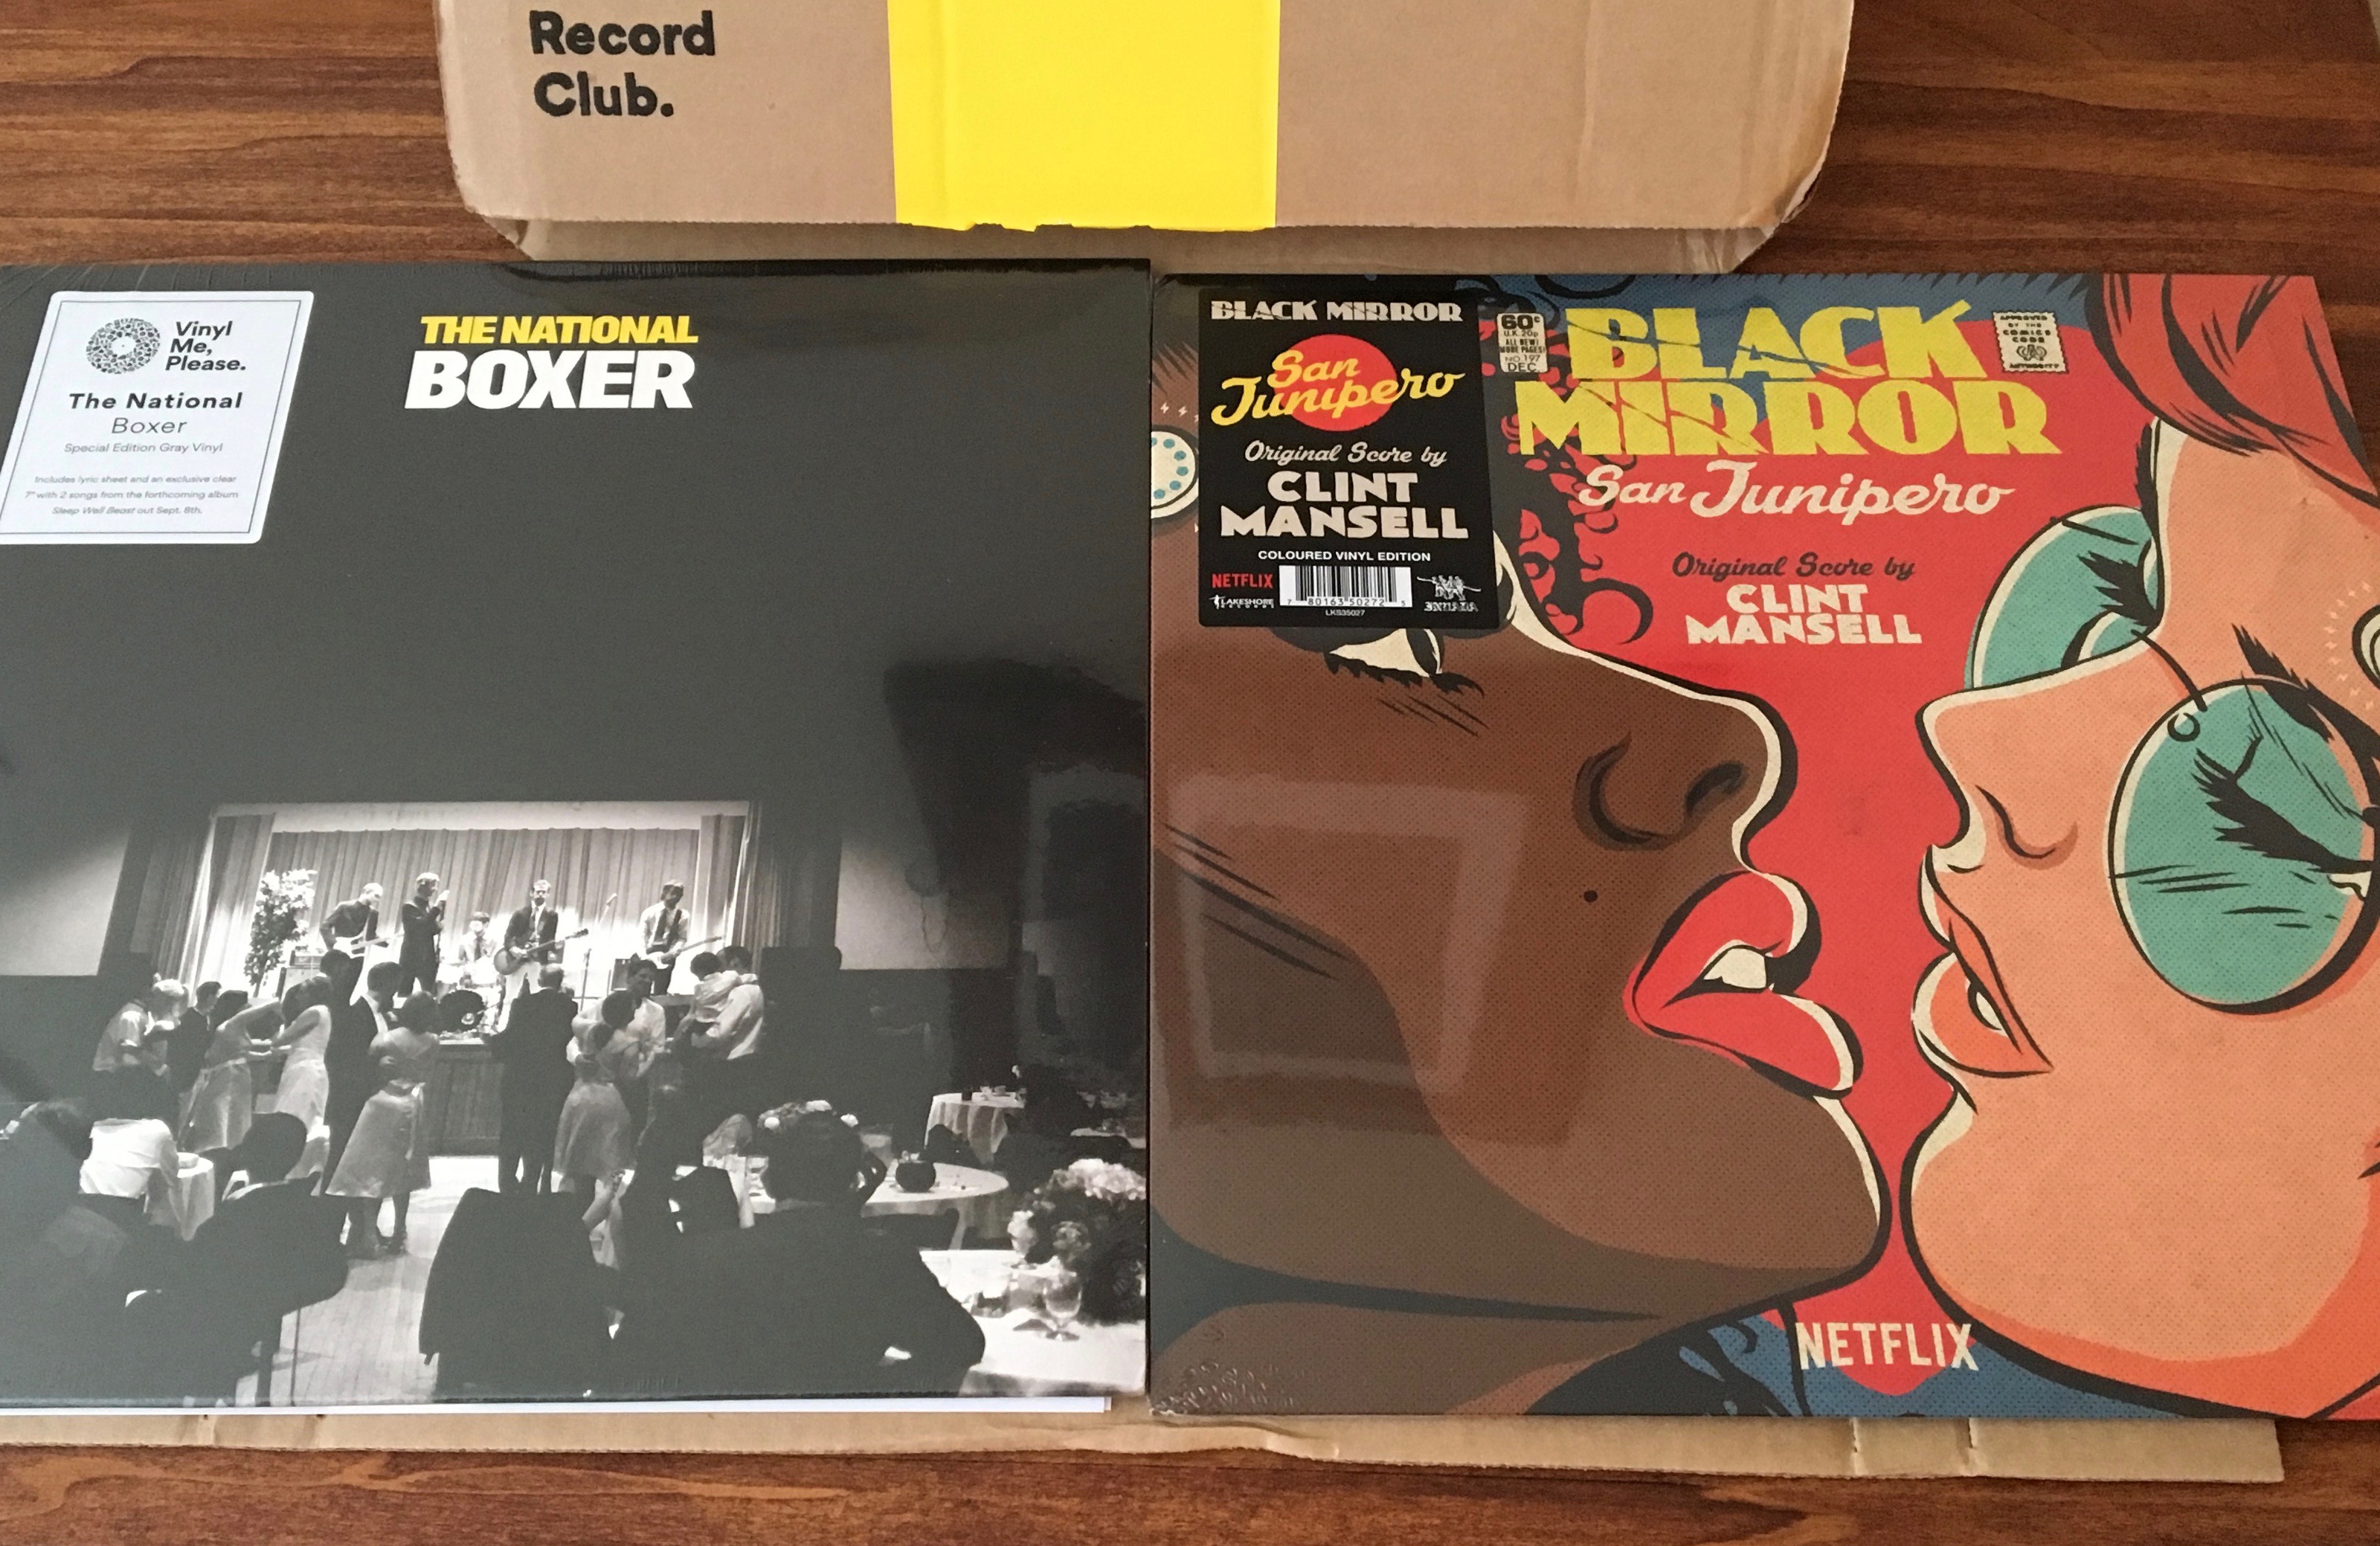 Geek insider, geekinsider, geekinsider. Com,, vinyl me, please august edition: the national 'boxer', entertainment